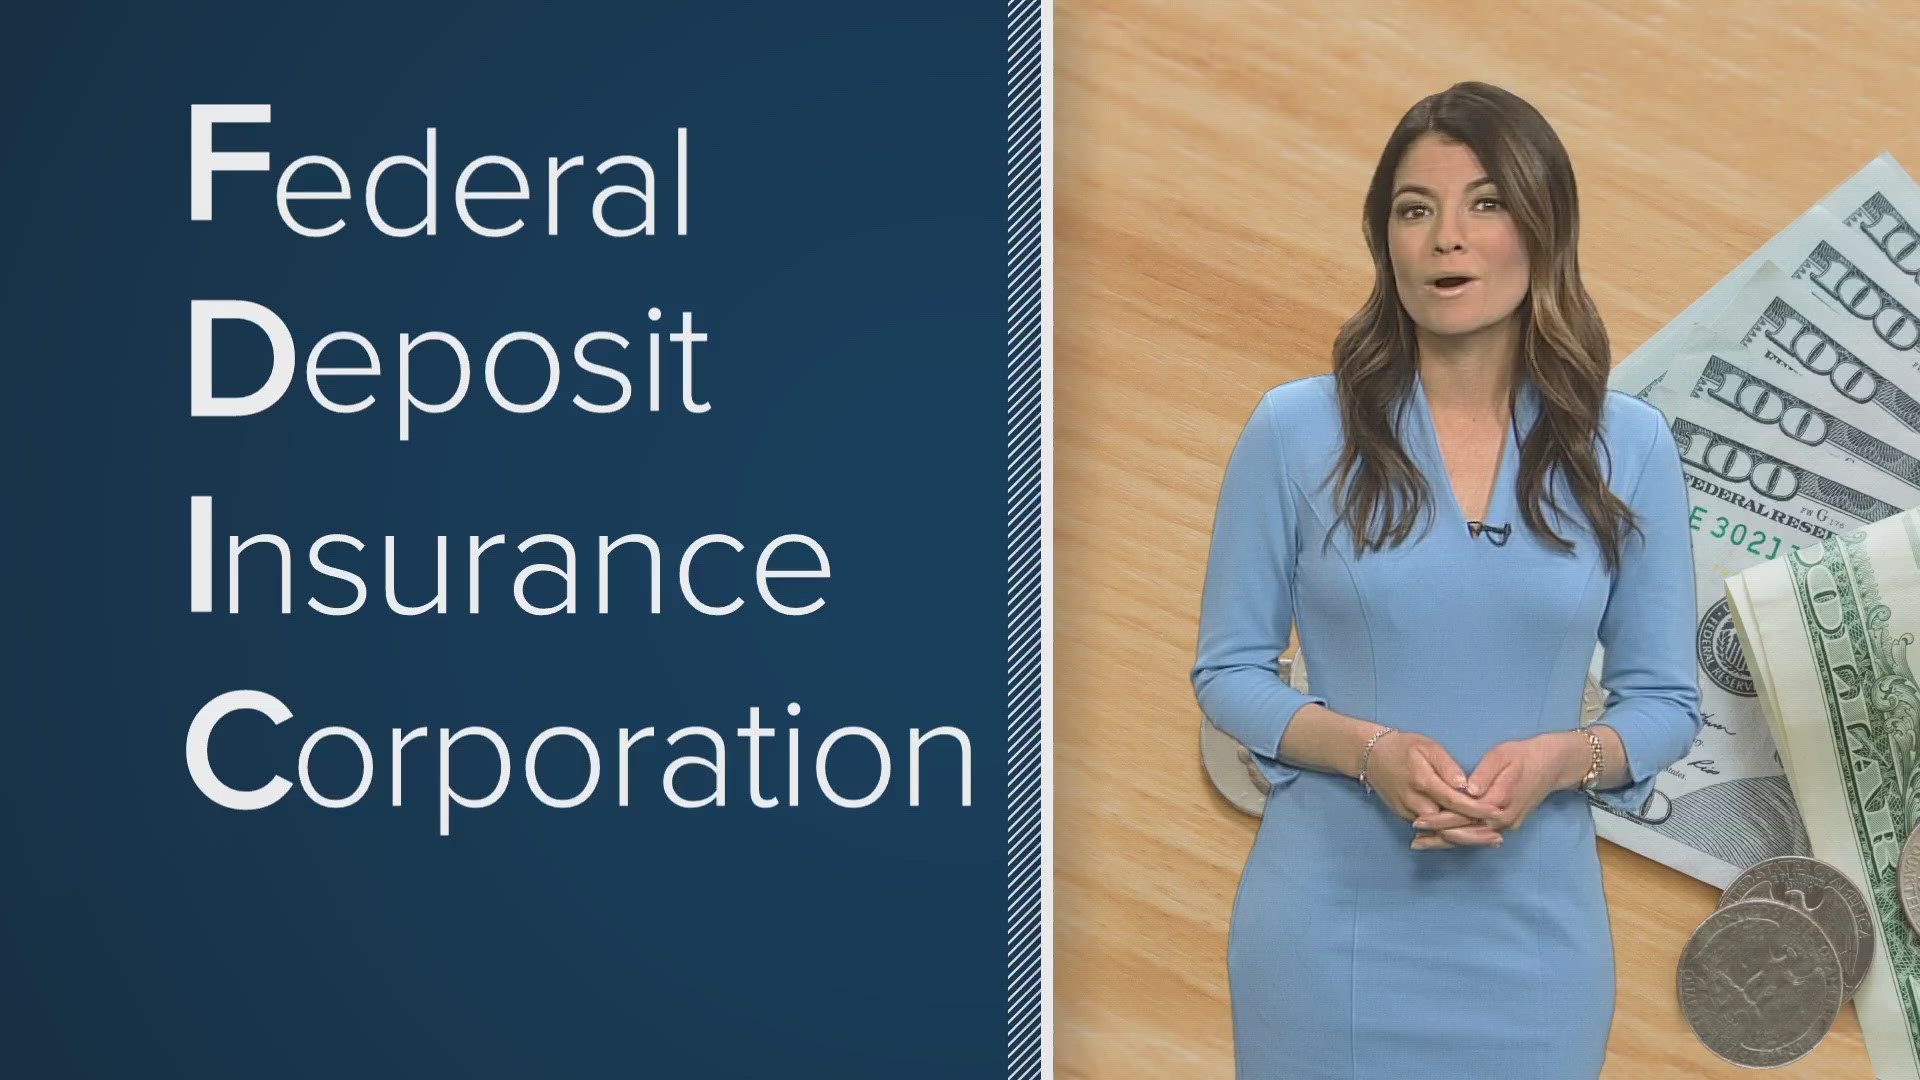 Allison Gormly tells us 'What's the Deal' with what FDIC protection includes.